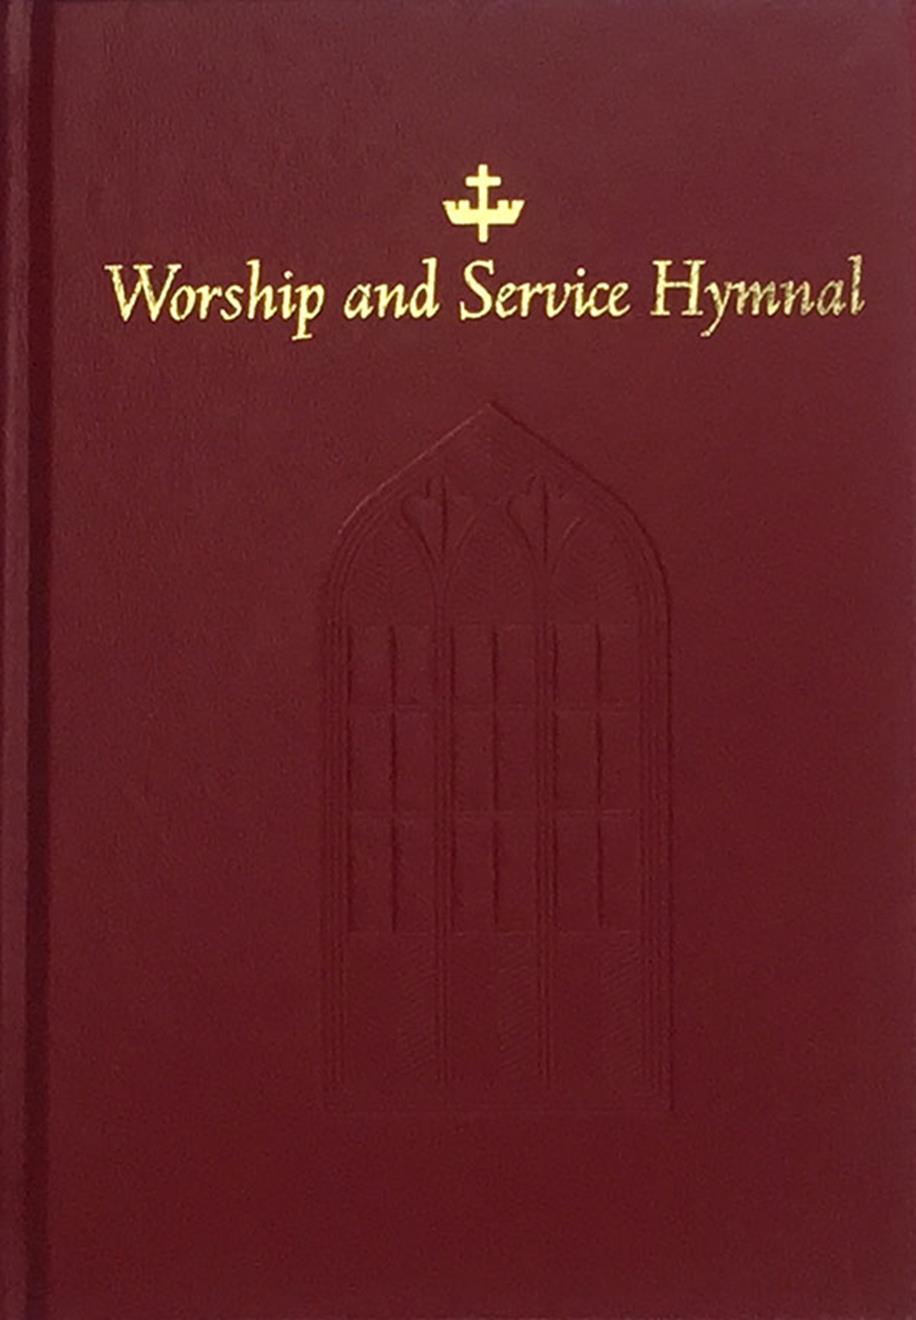 Worship and Service Hymnal - Red Cover Image